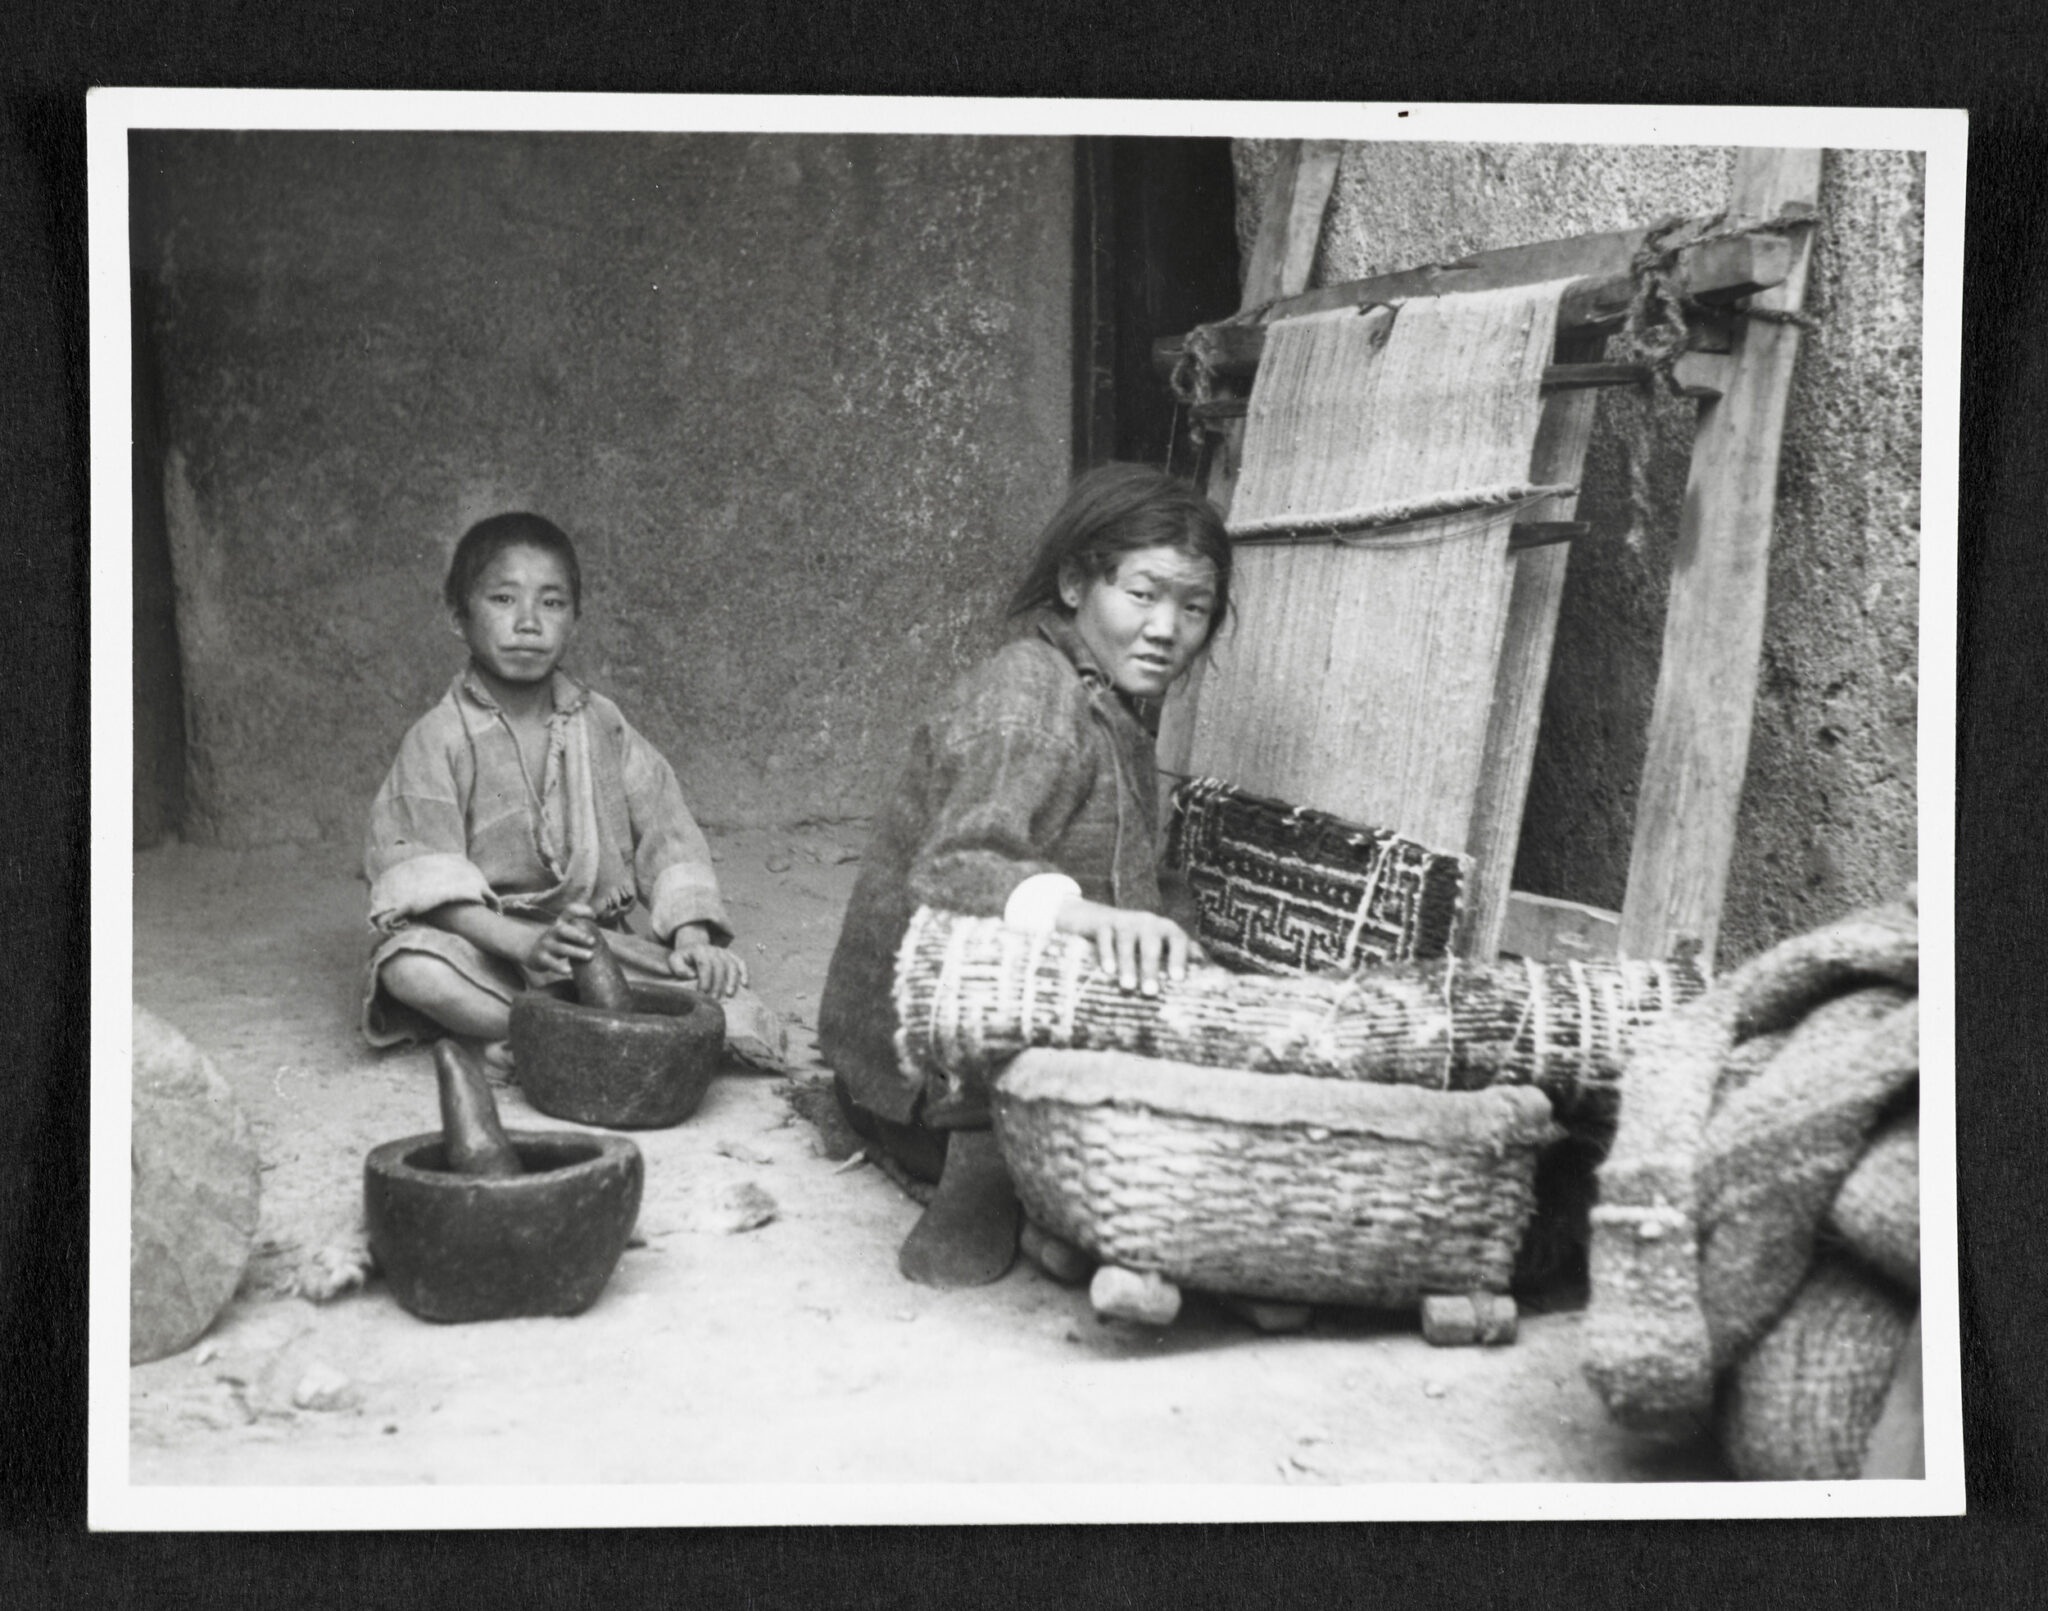 Black and white photograph of boy at left sitting behind mortar and pestle, and woman at right sitting at loom